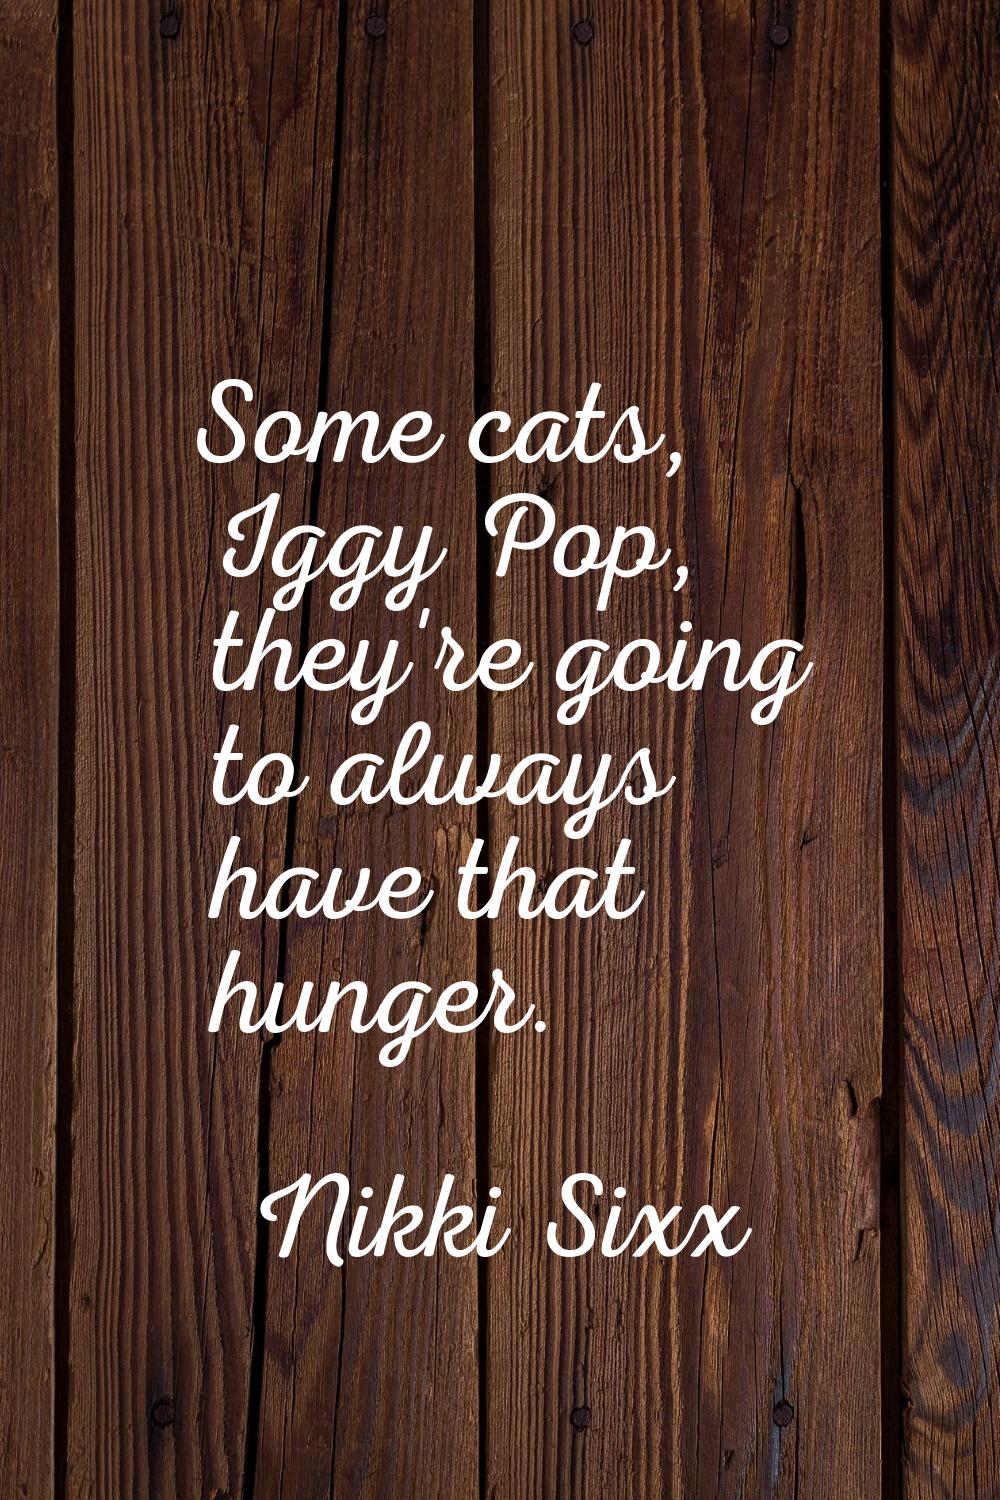 Some cats, Iggy Pop, they're going to always have that hunger.